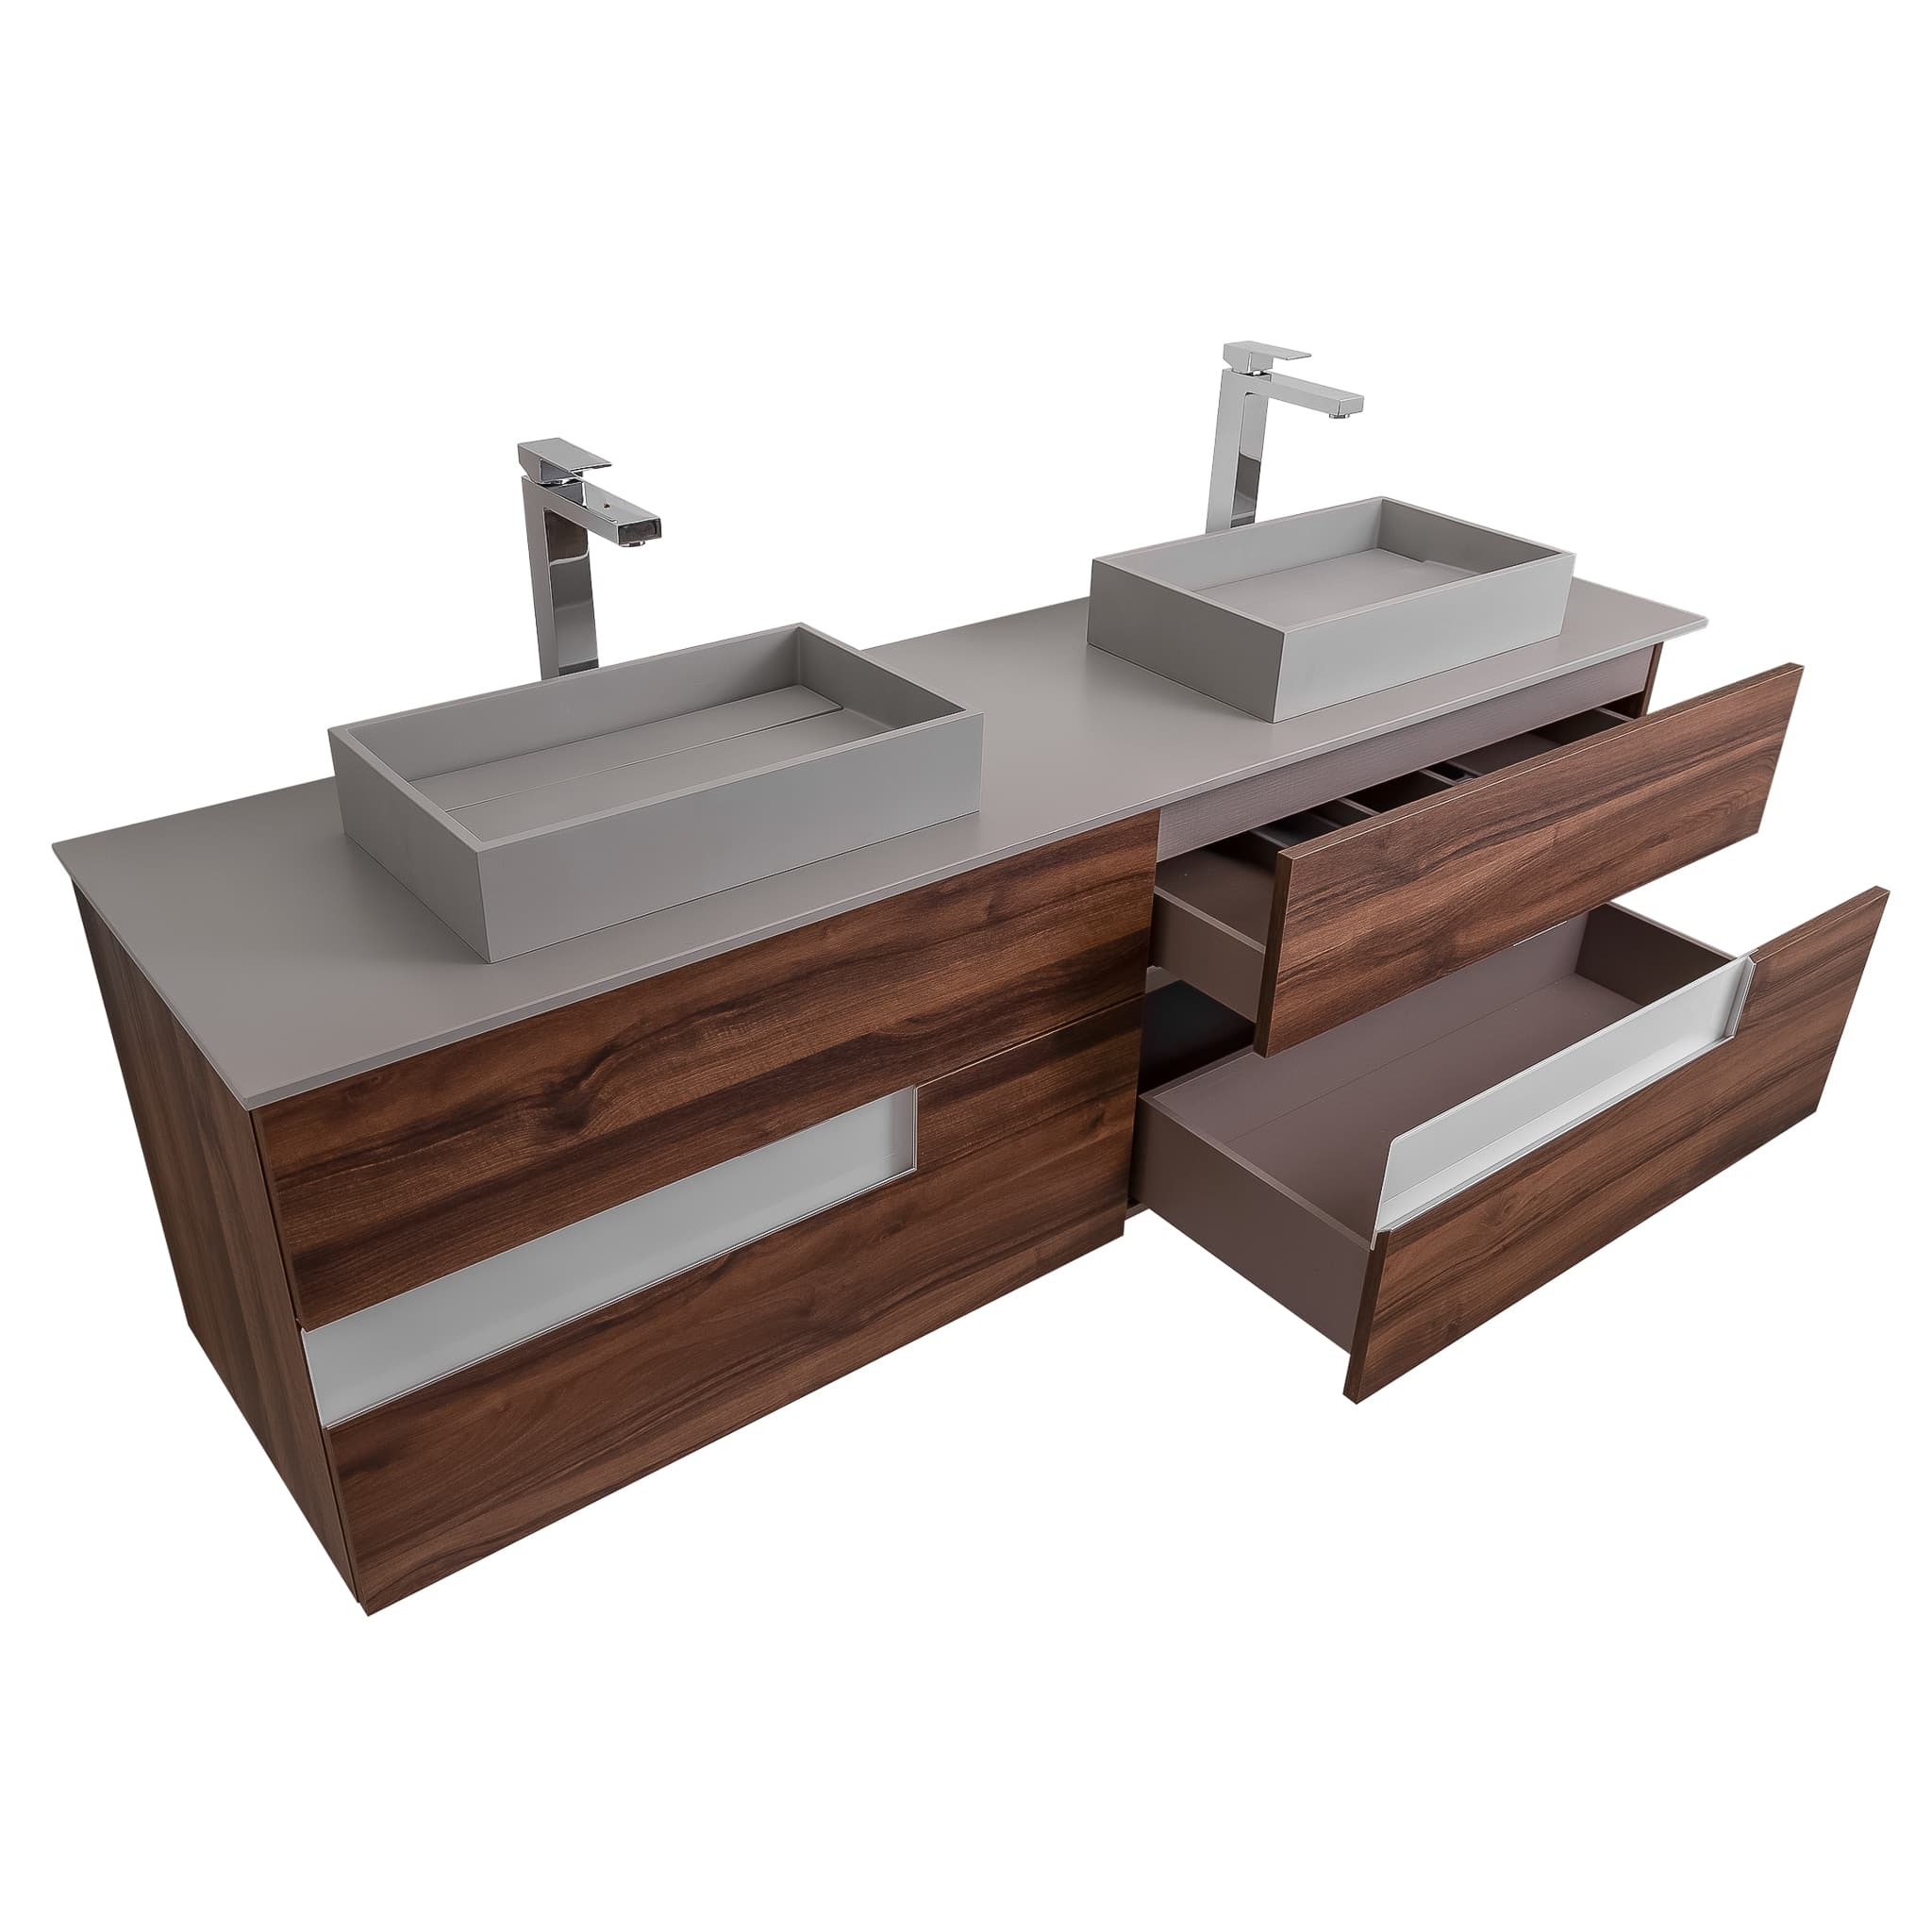 Vision 72 Valenti Medium Brown Wood Cabinet, Solid Surface Flat Grey Counter And Two Infinity Square Solid Surface Grey Basin 1329, Wall Mounted Modern Vanity Set